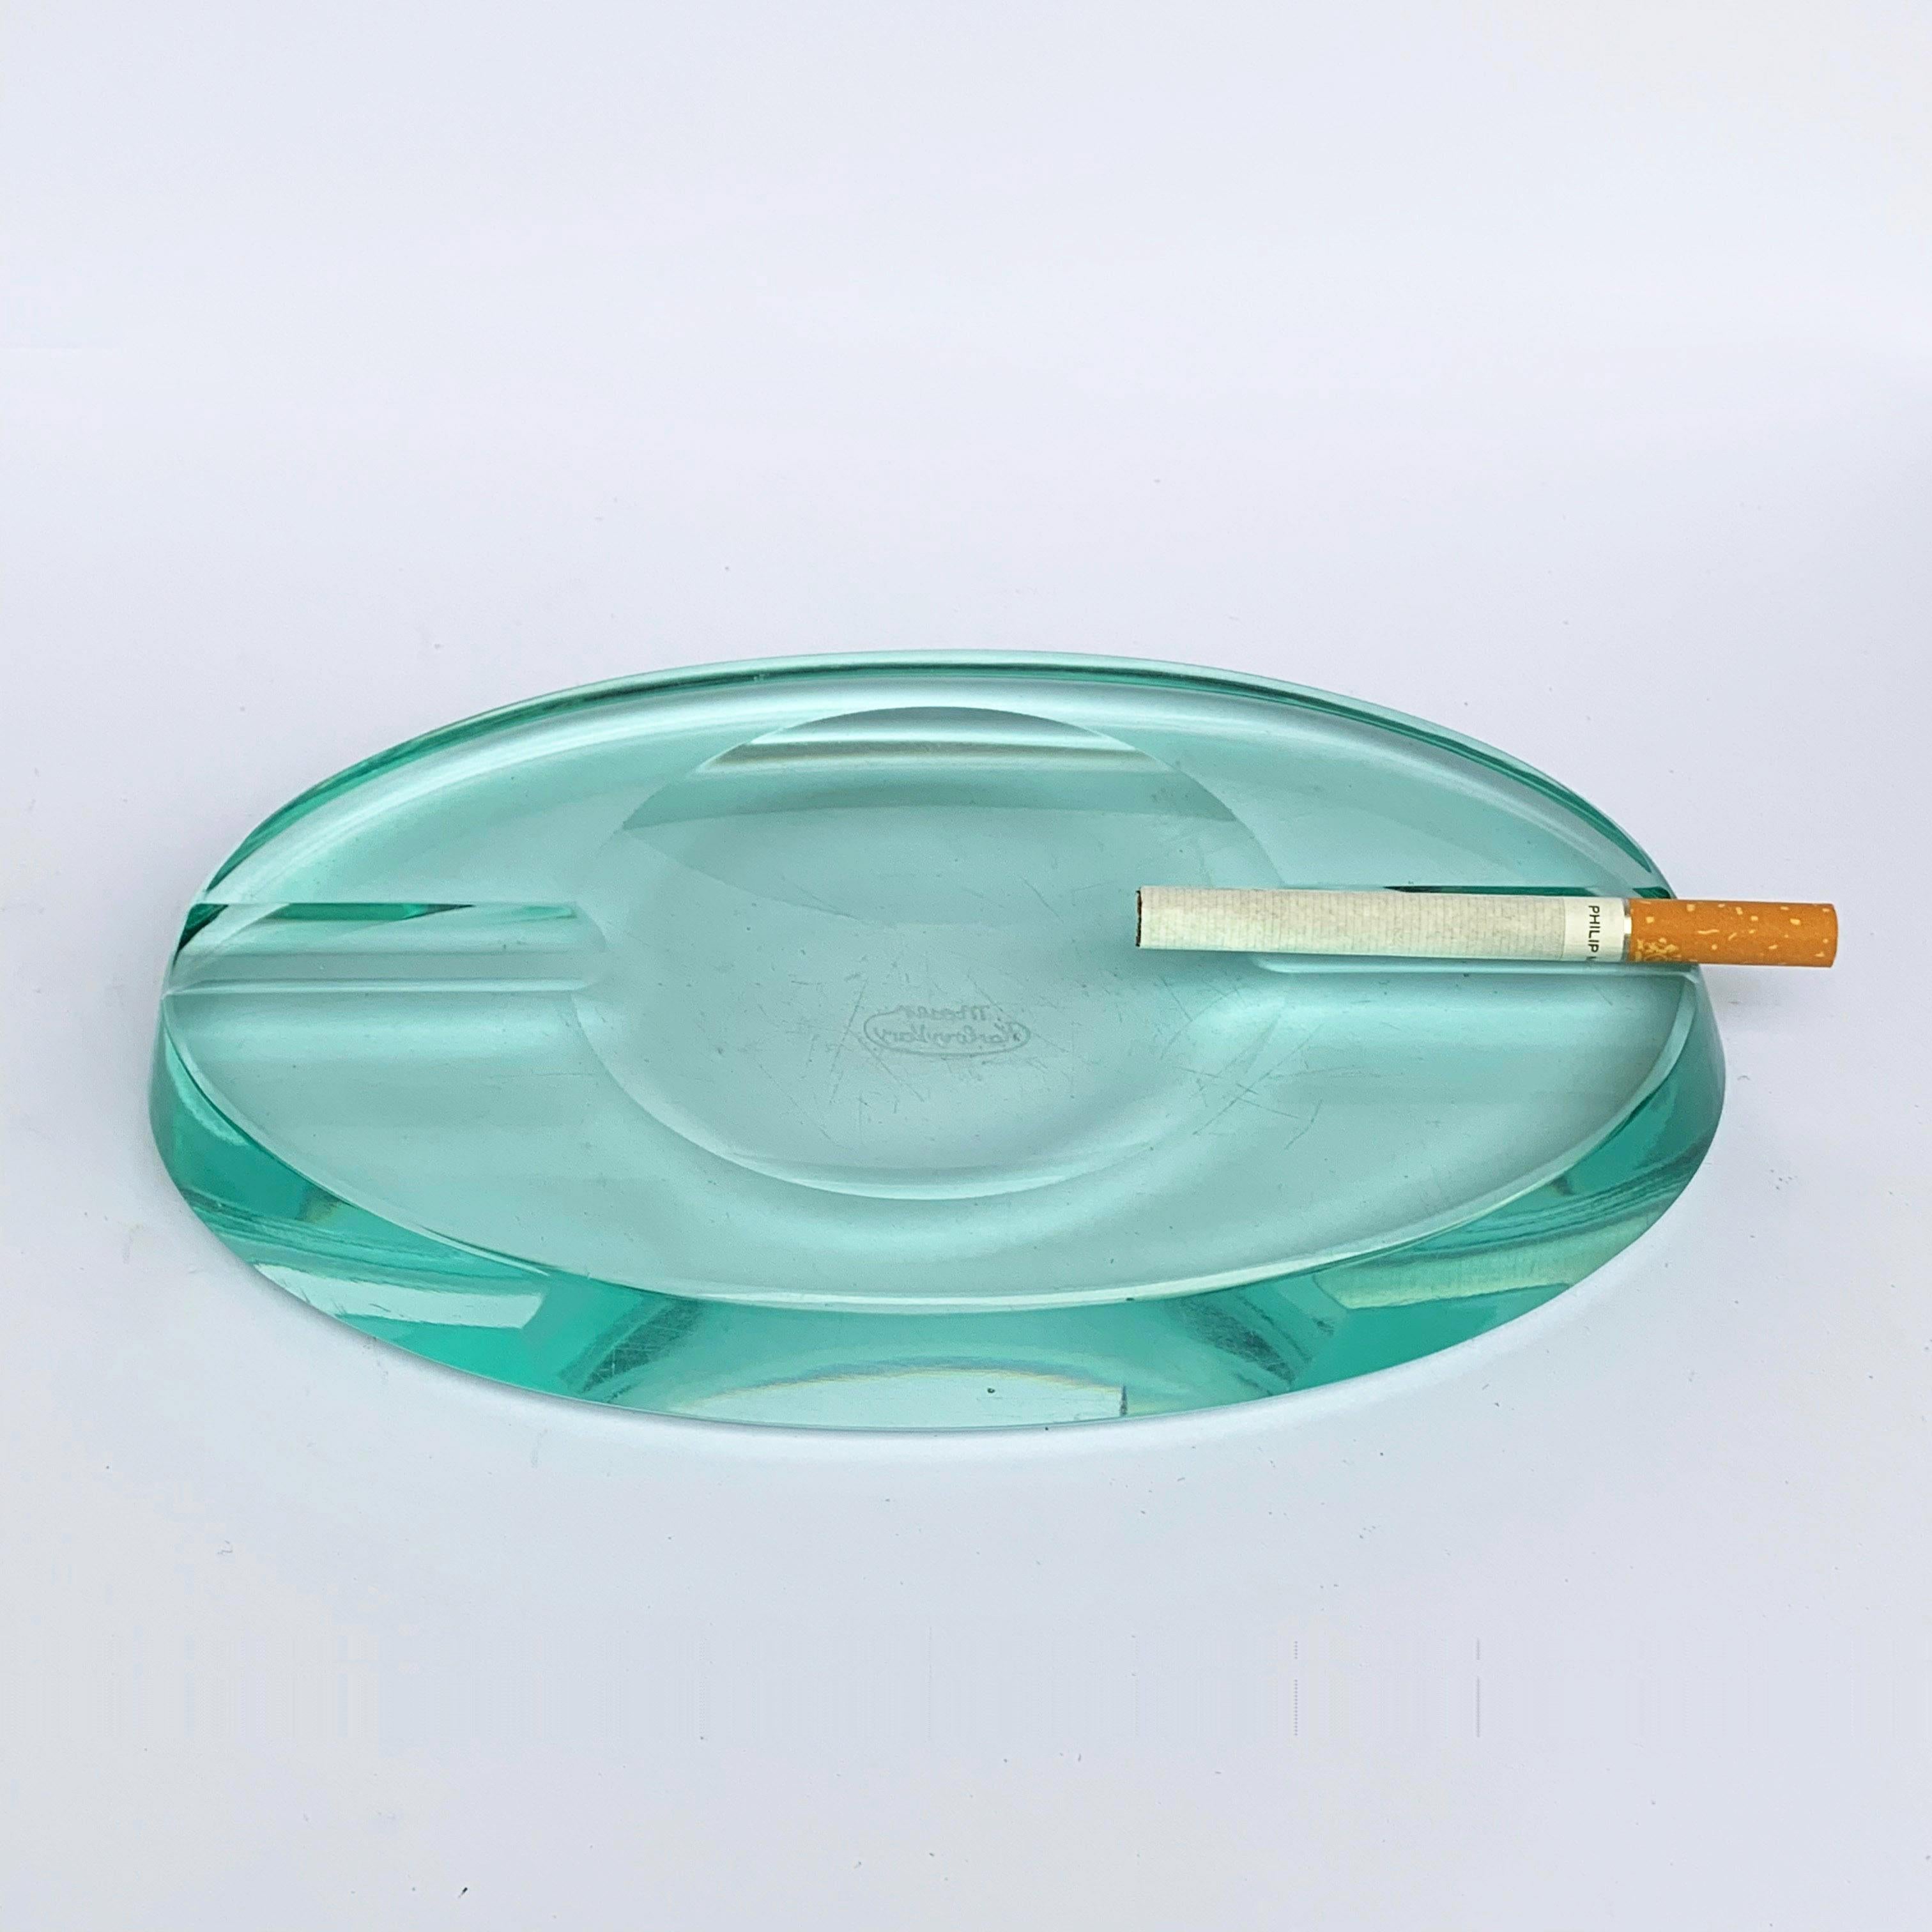 Karlovy Vary Moser, Ashtray Aquamarine Faceted Crystal Czech Republic, 1950s 9